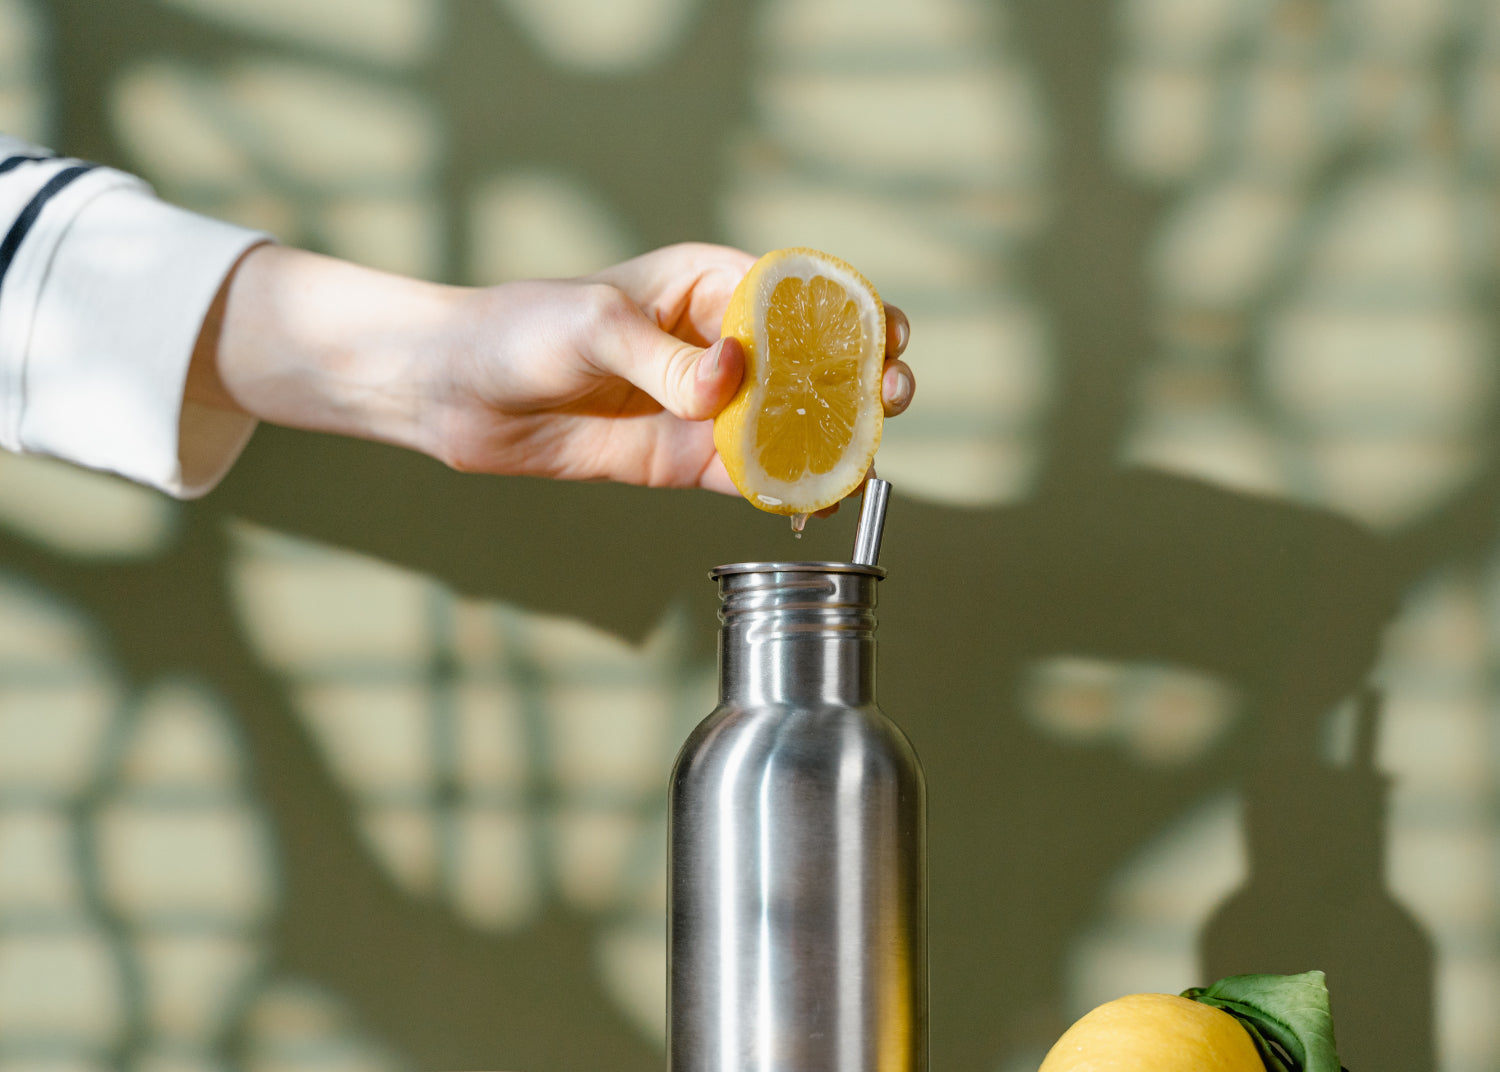 Hand squeezes a lemon into a reusable water bottle, which is a good candidate for a white label product